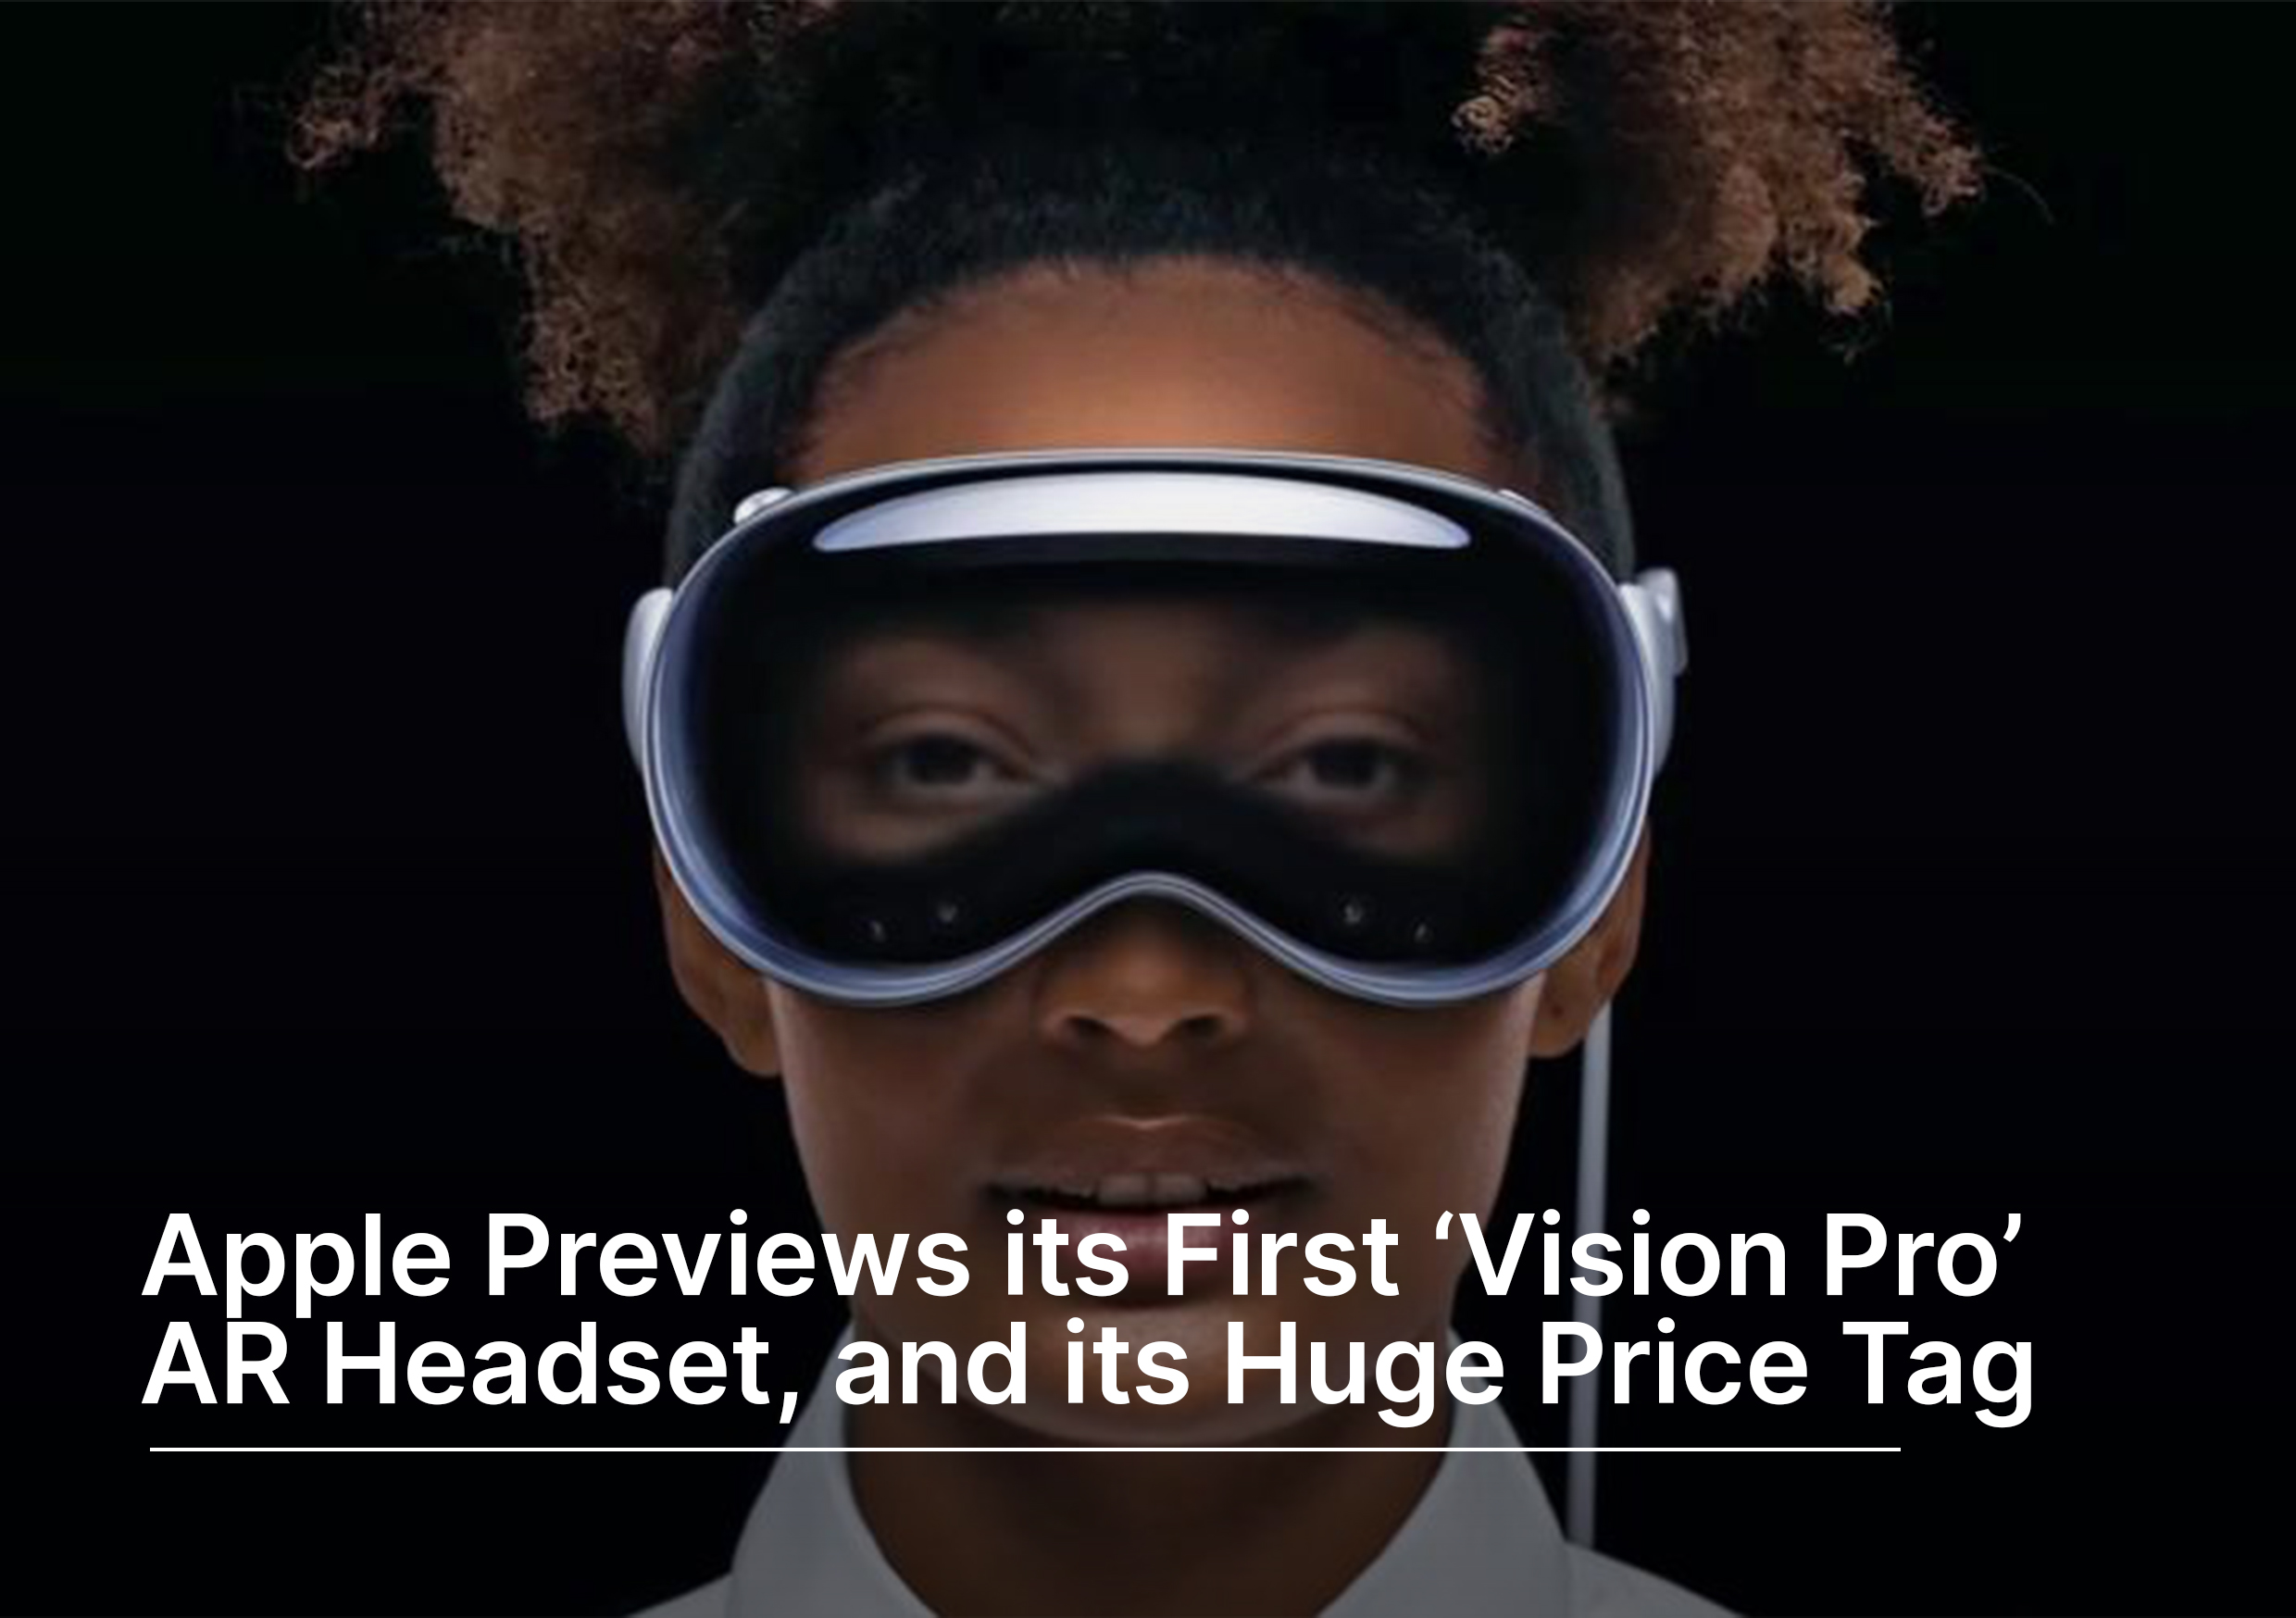 A black woman wearing the Vision Pro headset